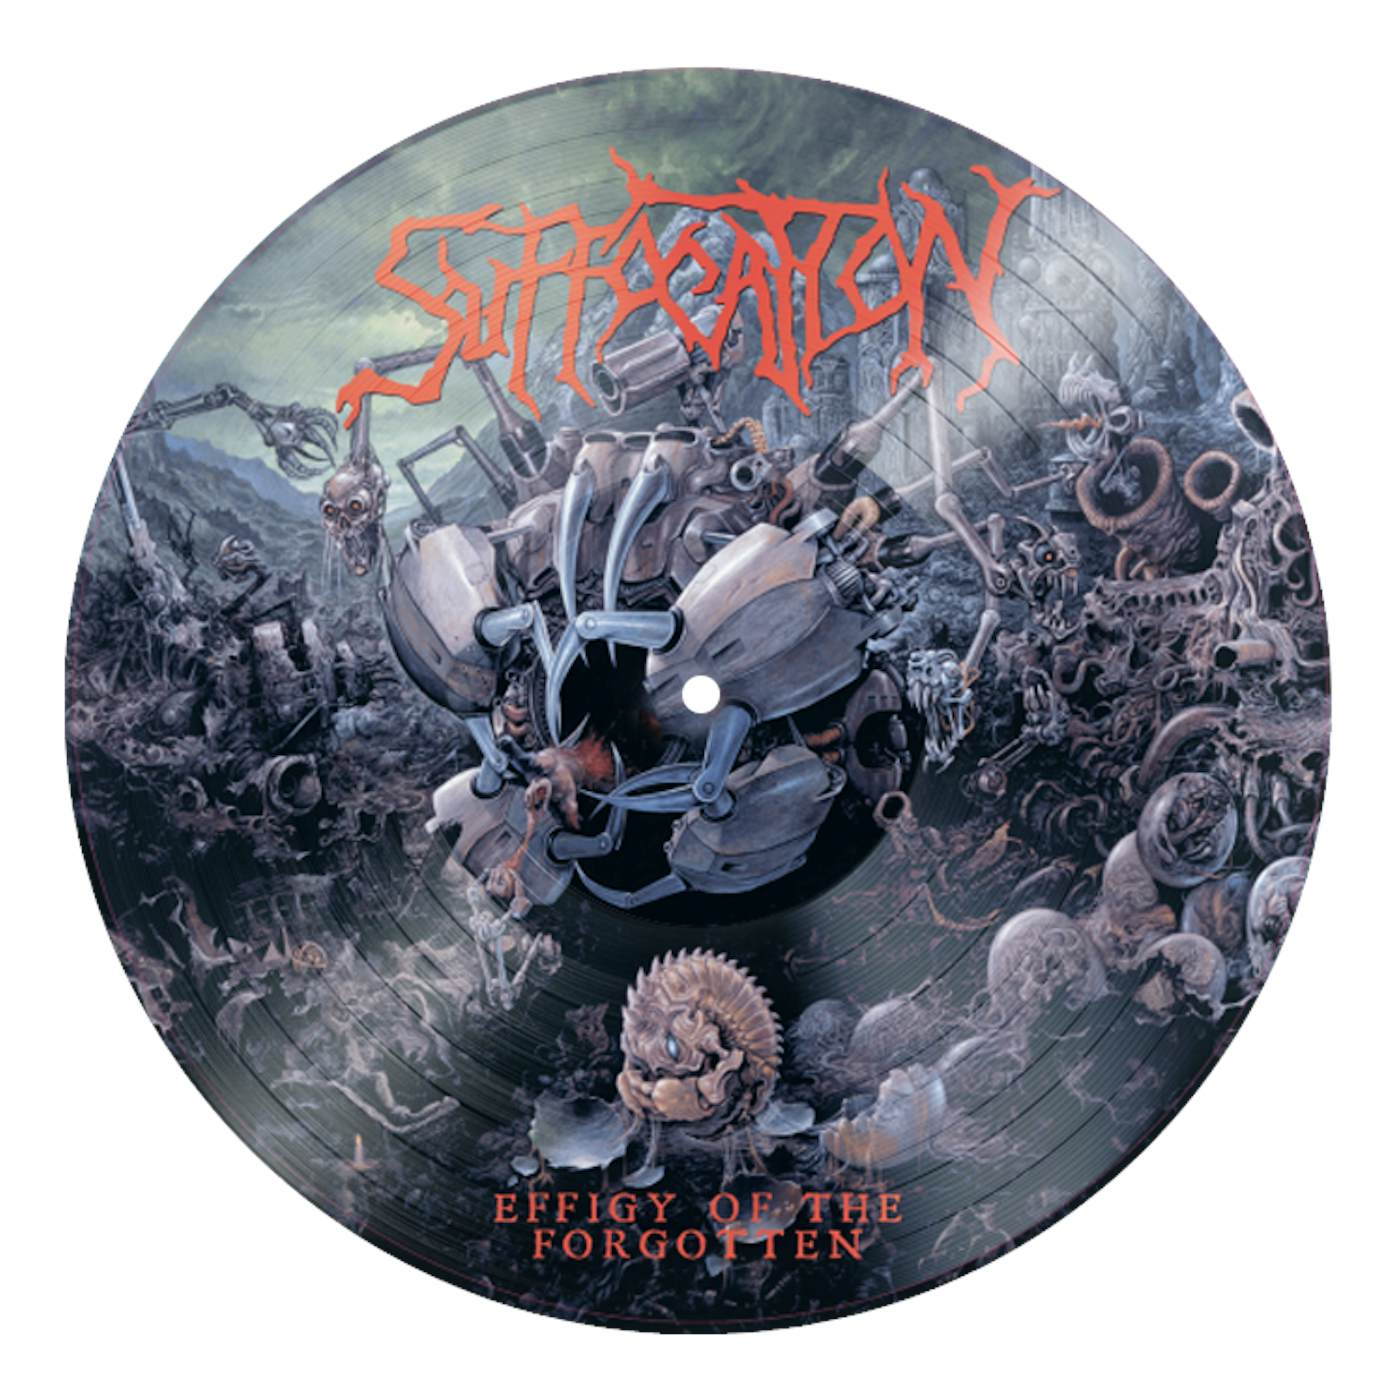 SUFFOCATION - 'Effigy Of The Forgotten' LP Picture Disc (Vinyl)